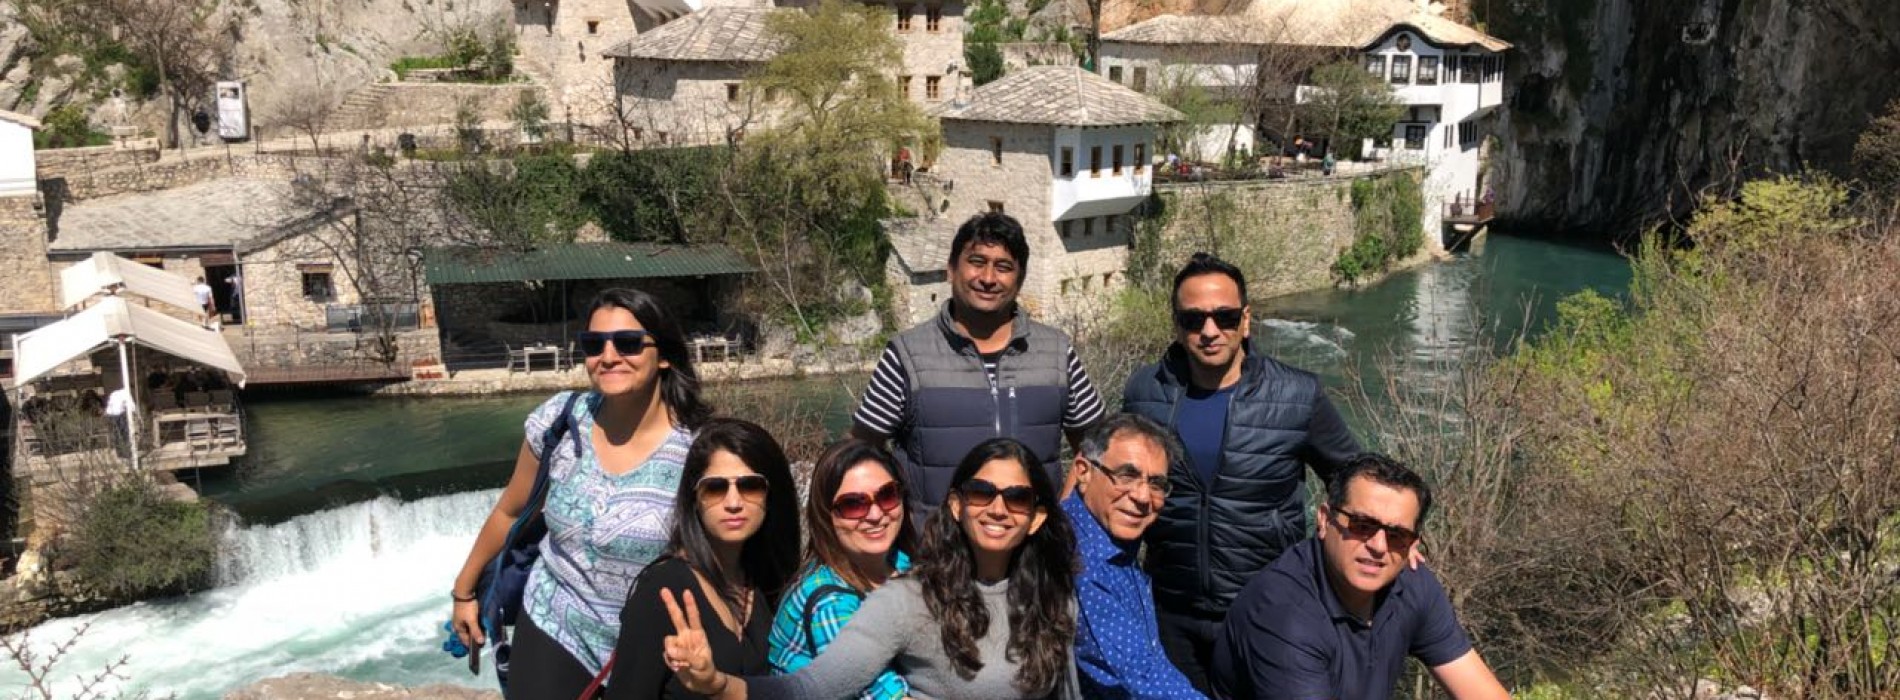 Nijhawan Group with Turkish Airlines conducts a FAM Trip to Bosnia and Herzegovina